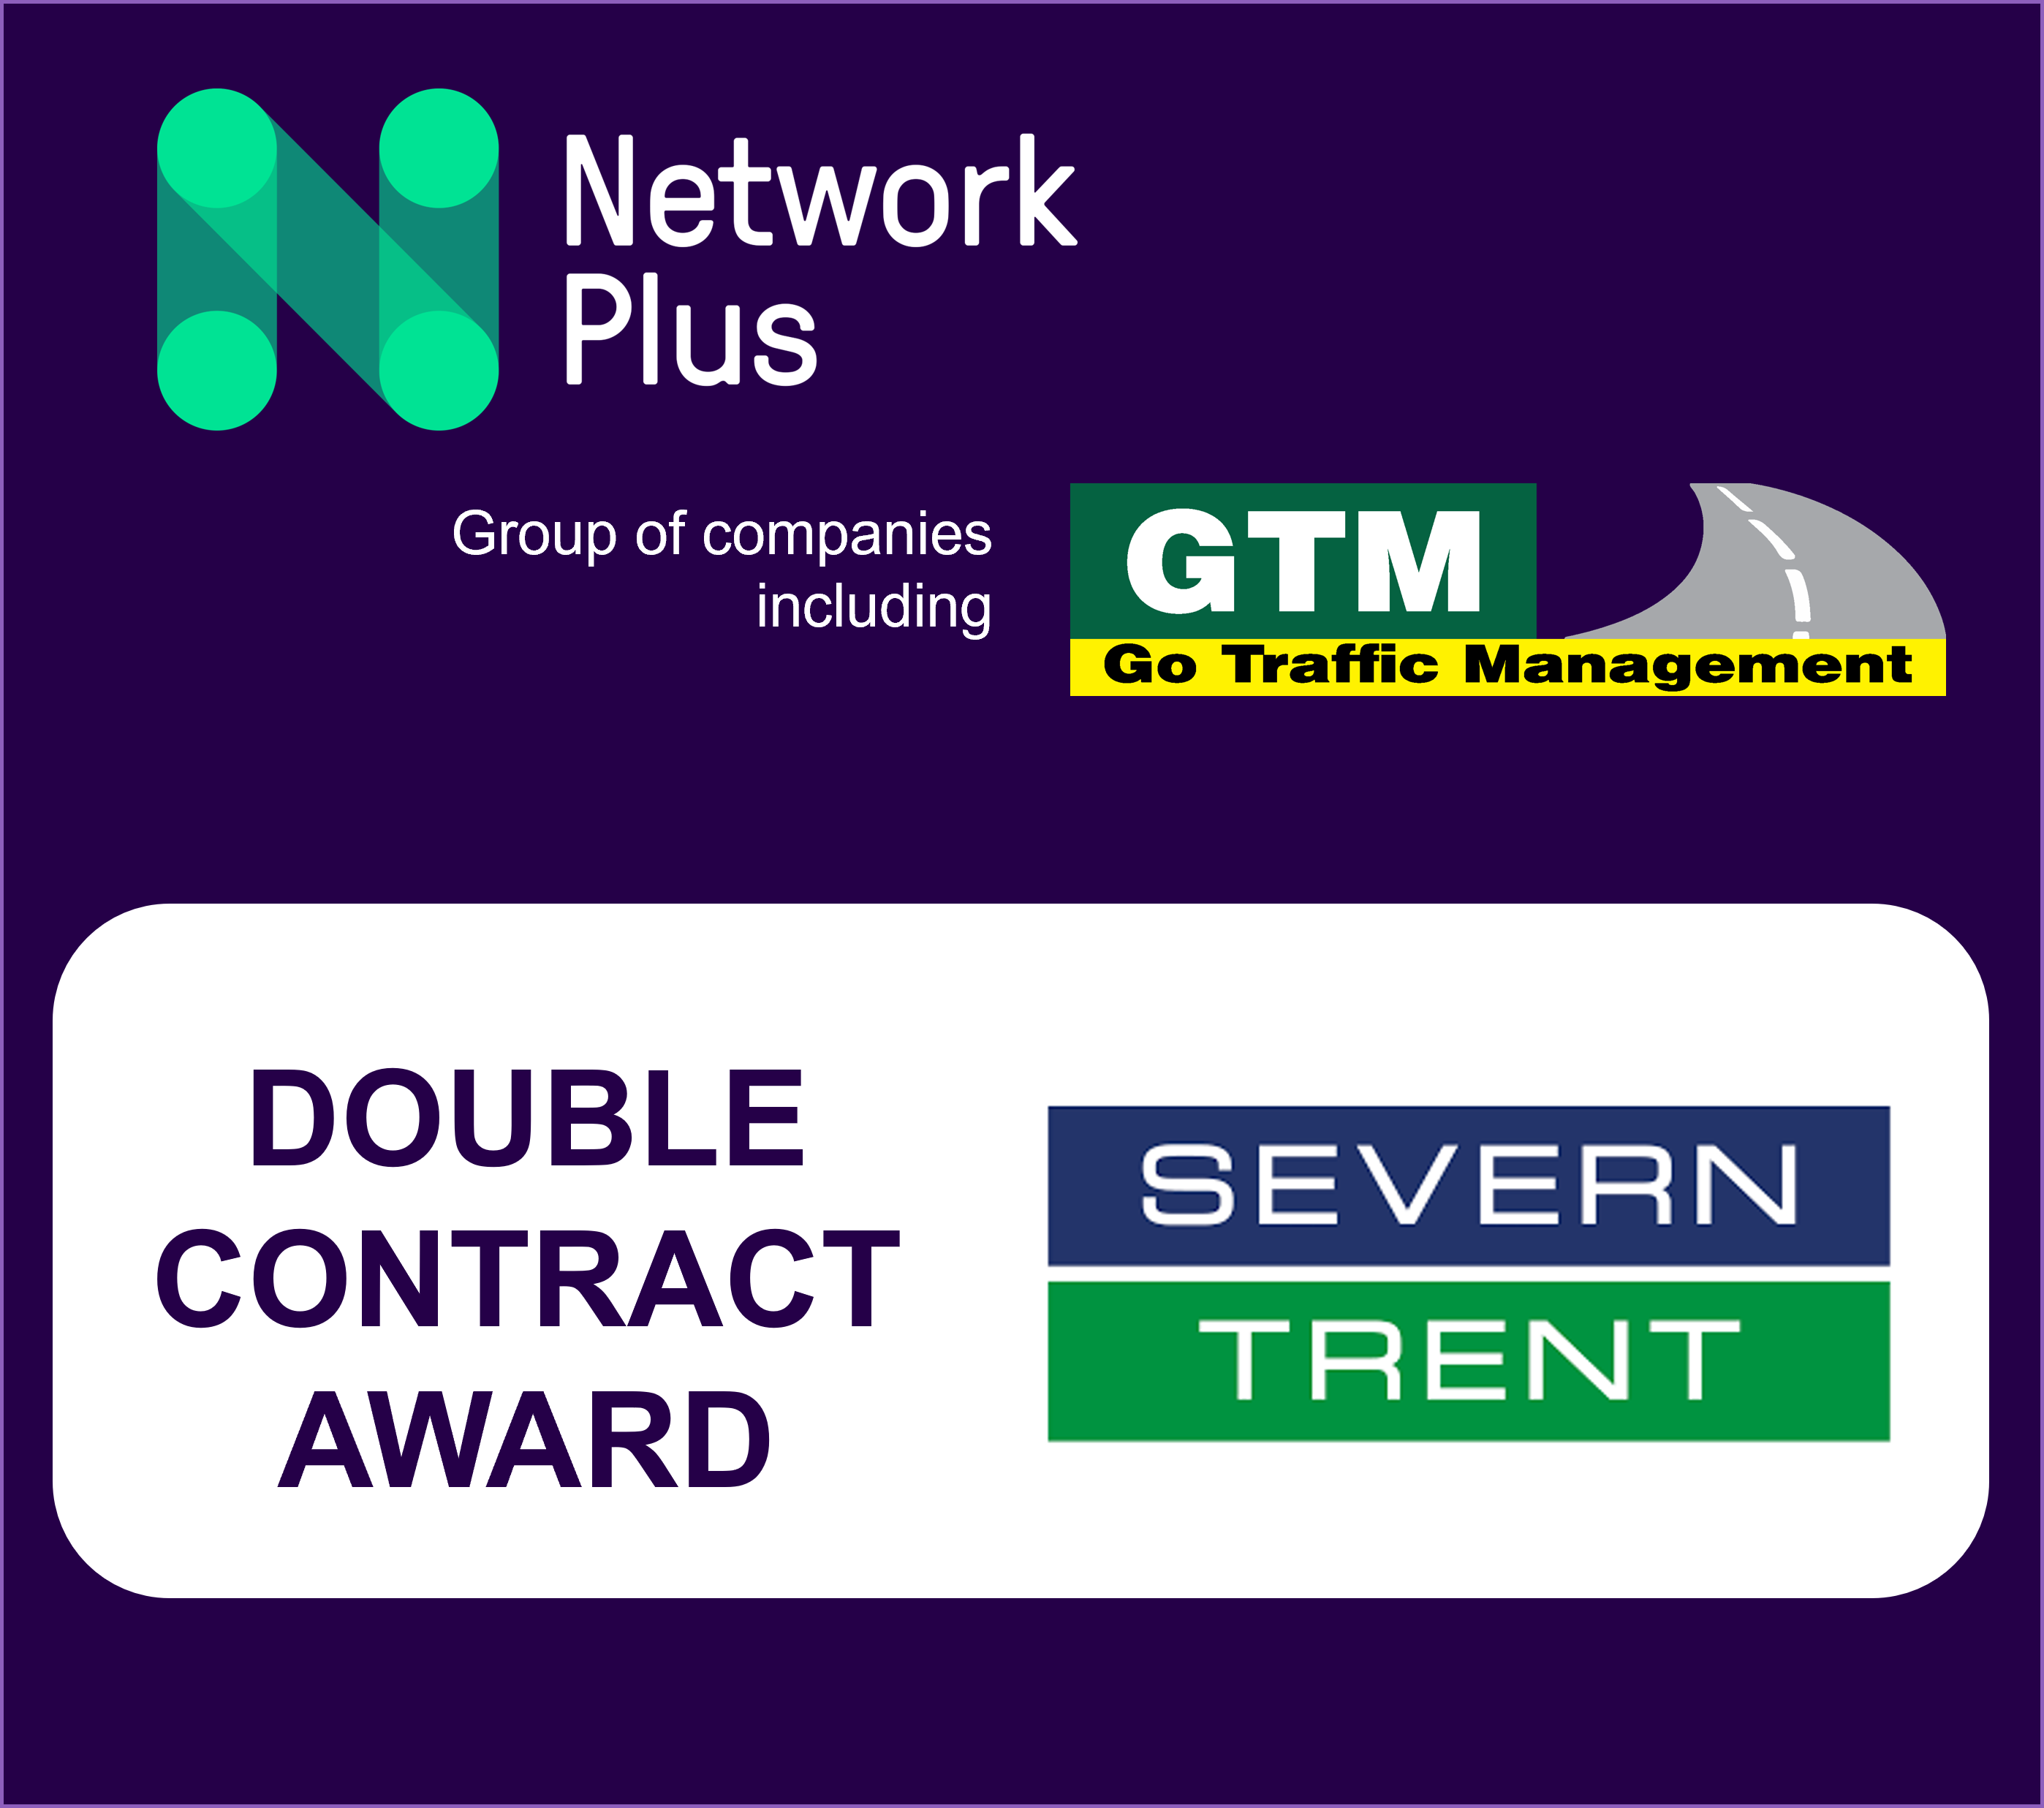 double contract award with Severn Trent